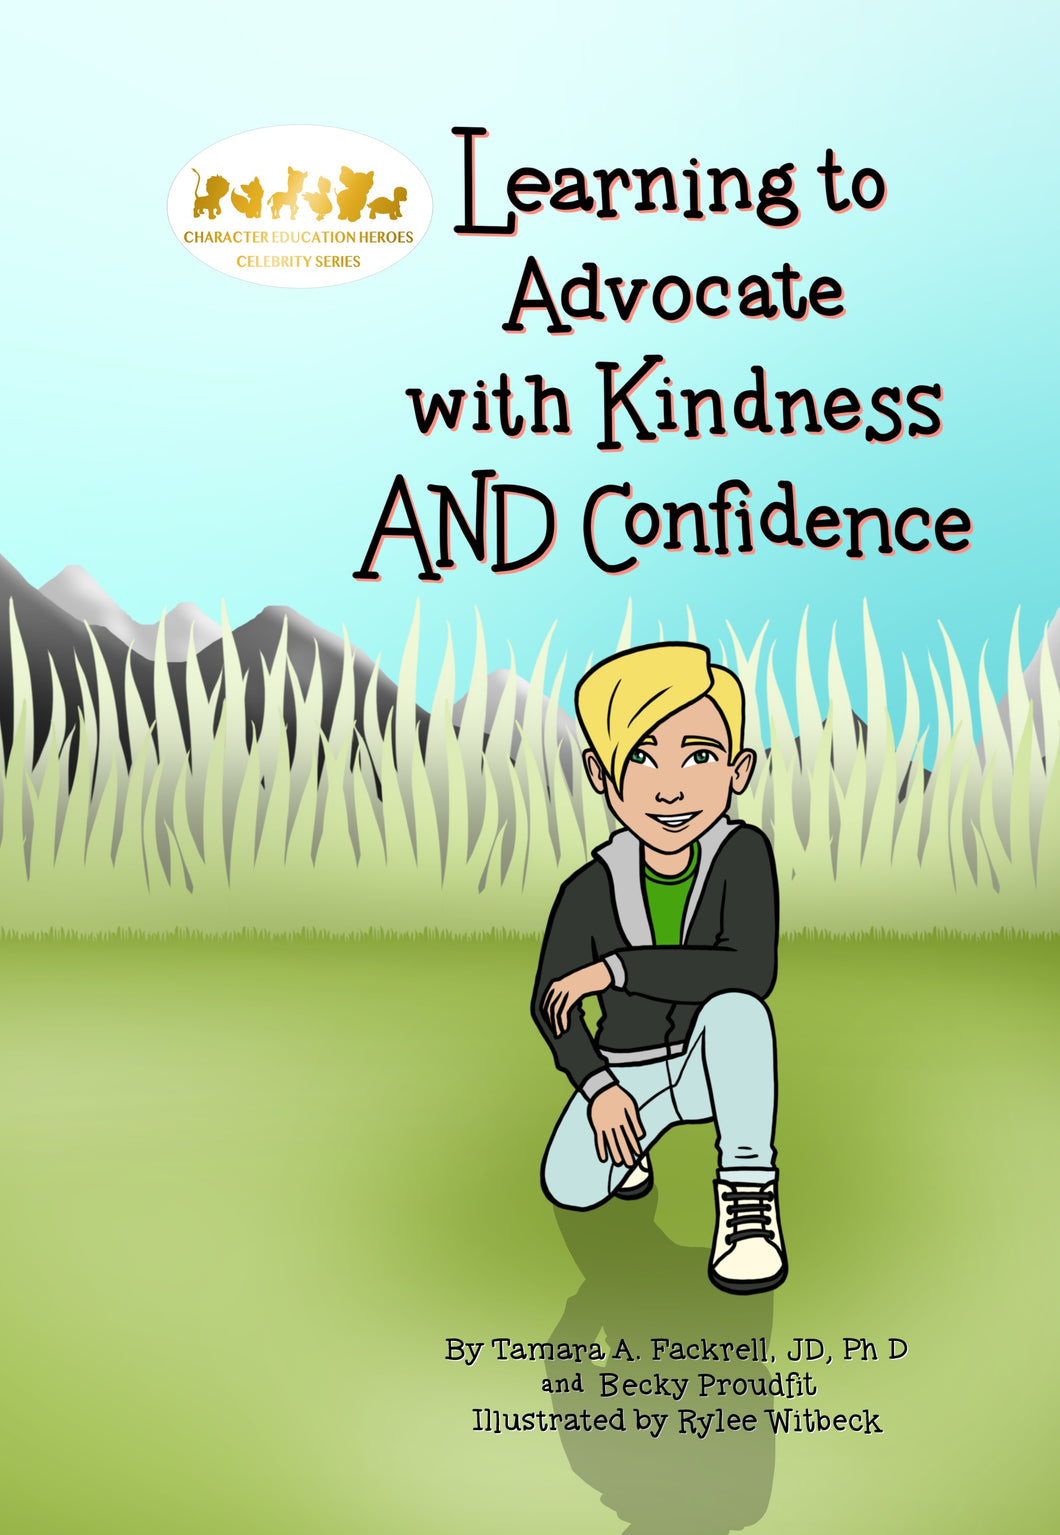 16:Paperback Book: Learning to Advocate with Kindness and Confidence (Paperback)